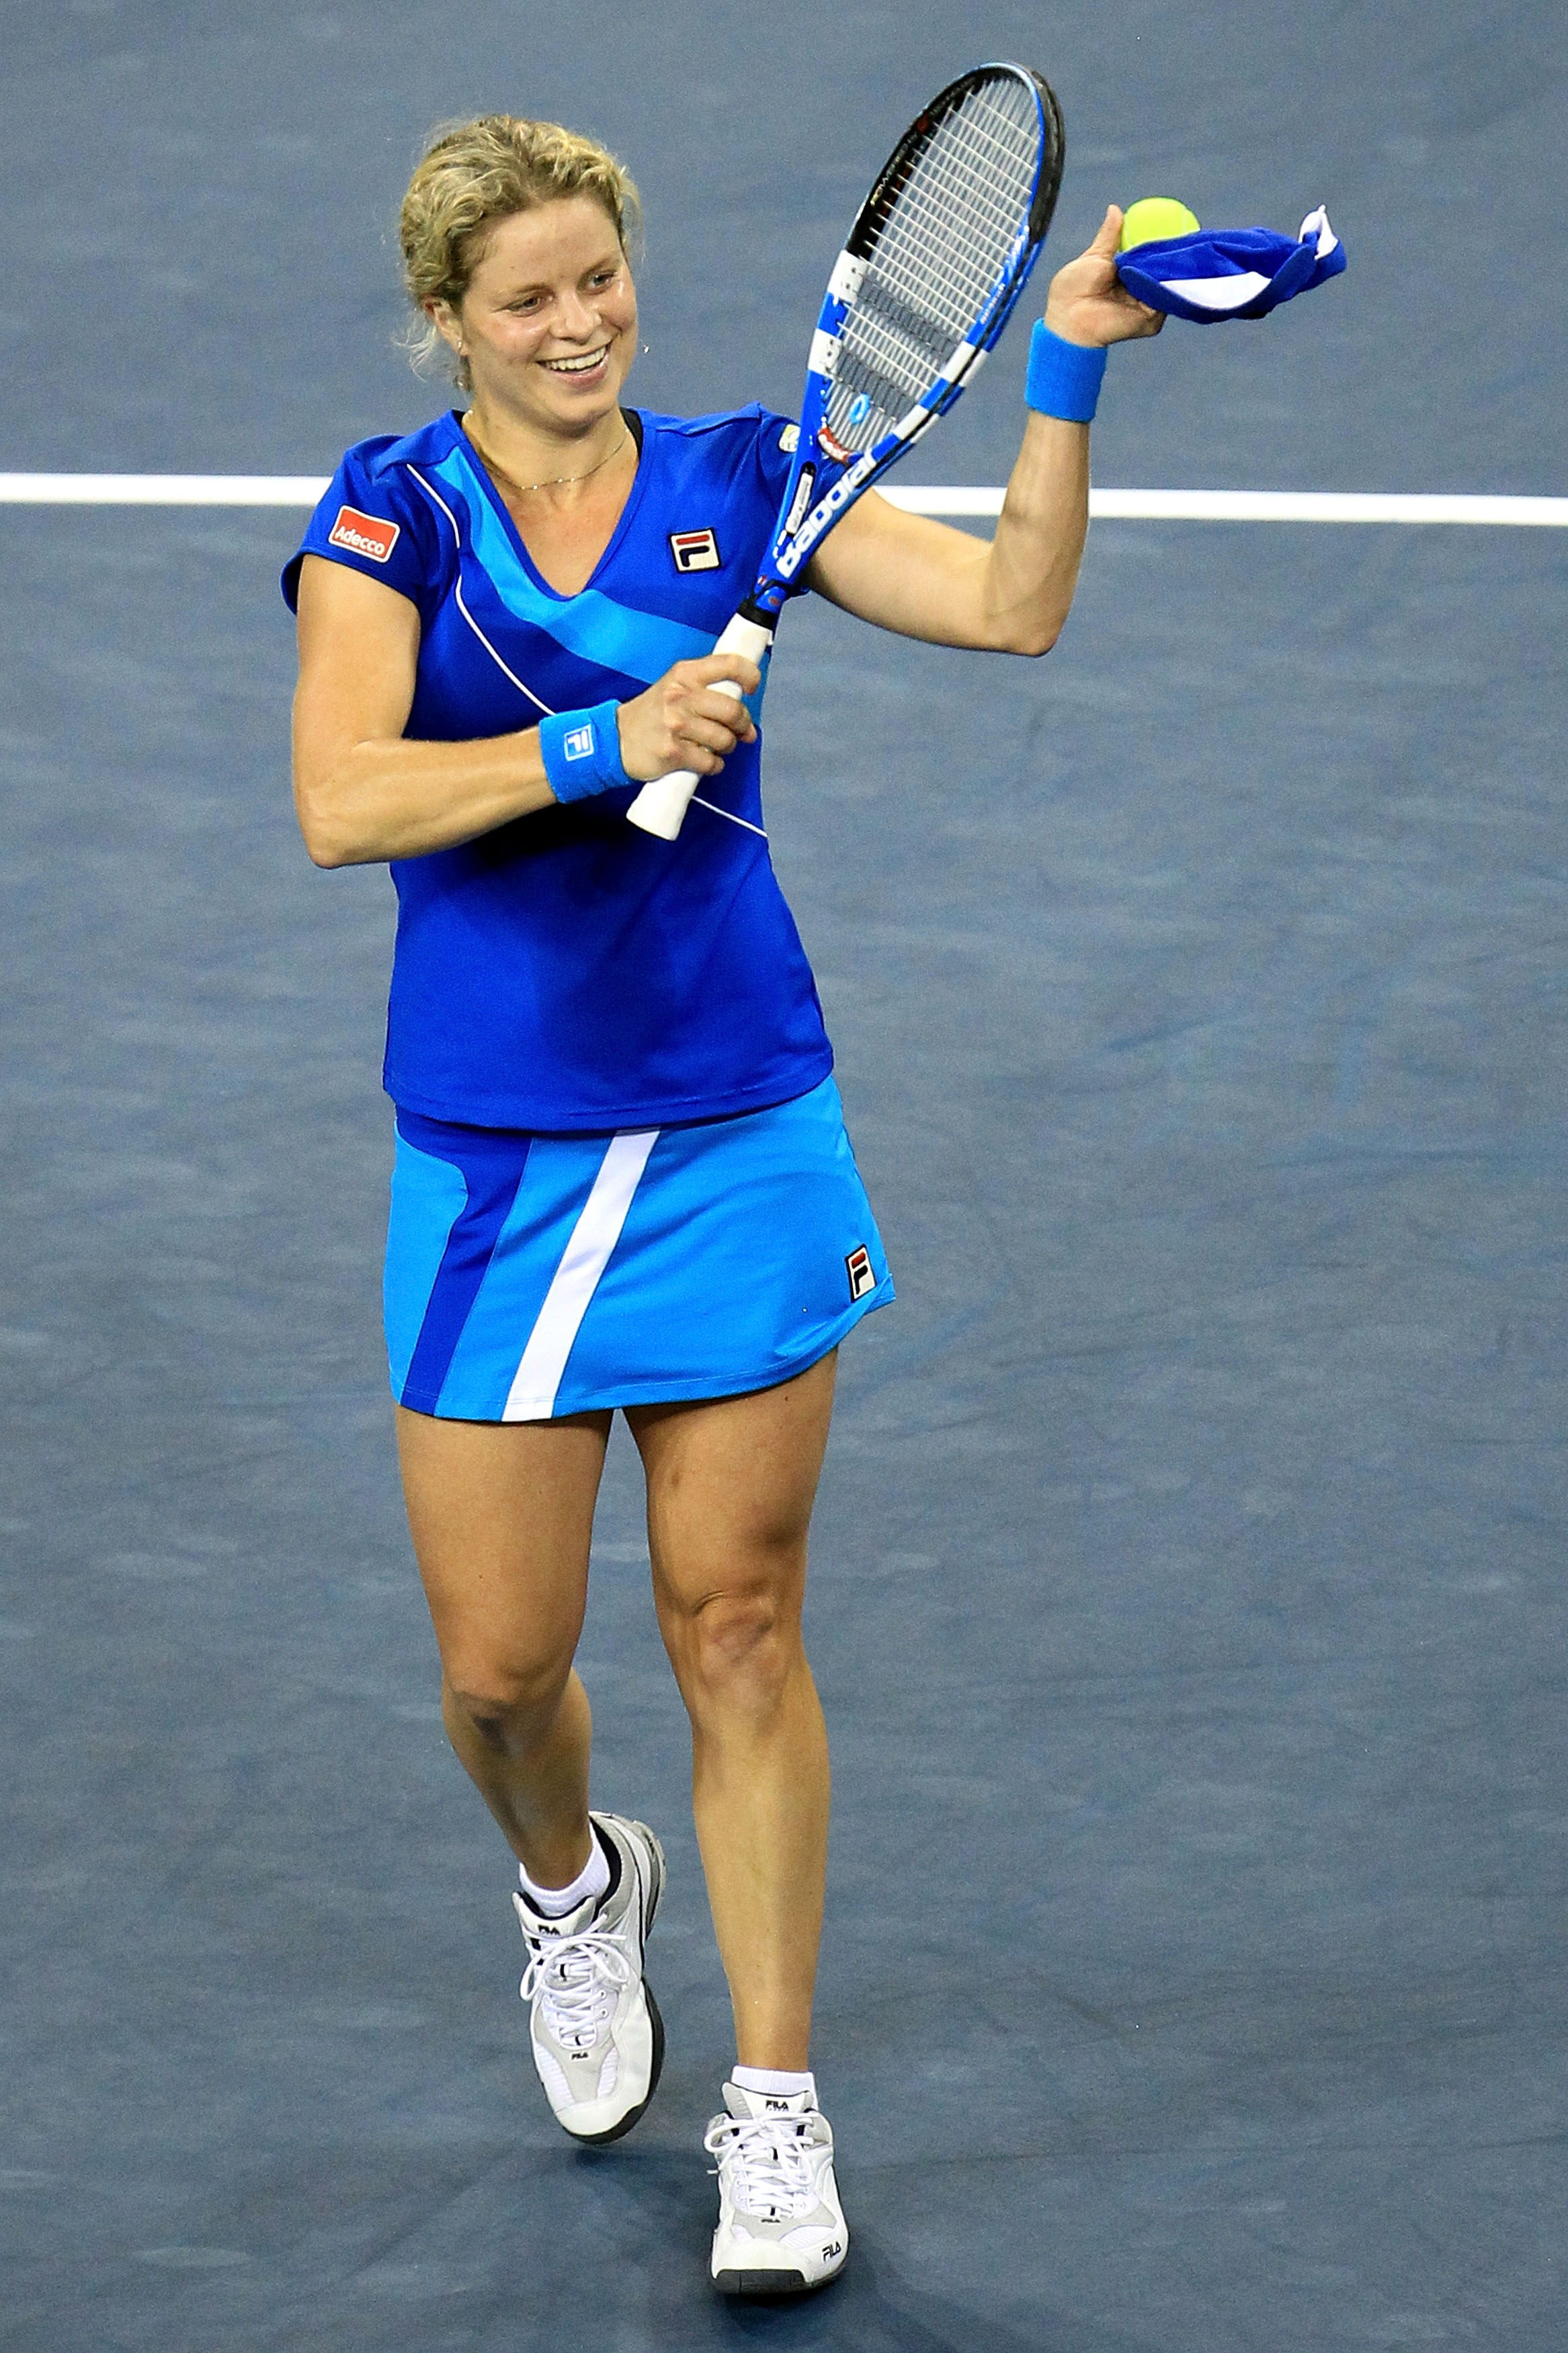 NEW YORK - SEPTEMBER 11:  Kim Clijsters of Belguim celebrates after defeating Vera Zvonareva of Russia during their women's singles final on day thirteen of the 2010 U.S. Open at the USTA Billie Jean King National Tennis Center on September 11, 2010 in th